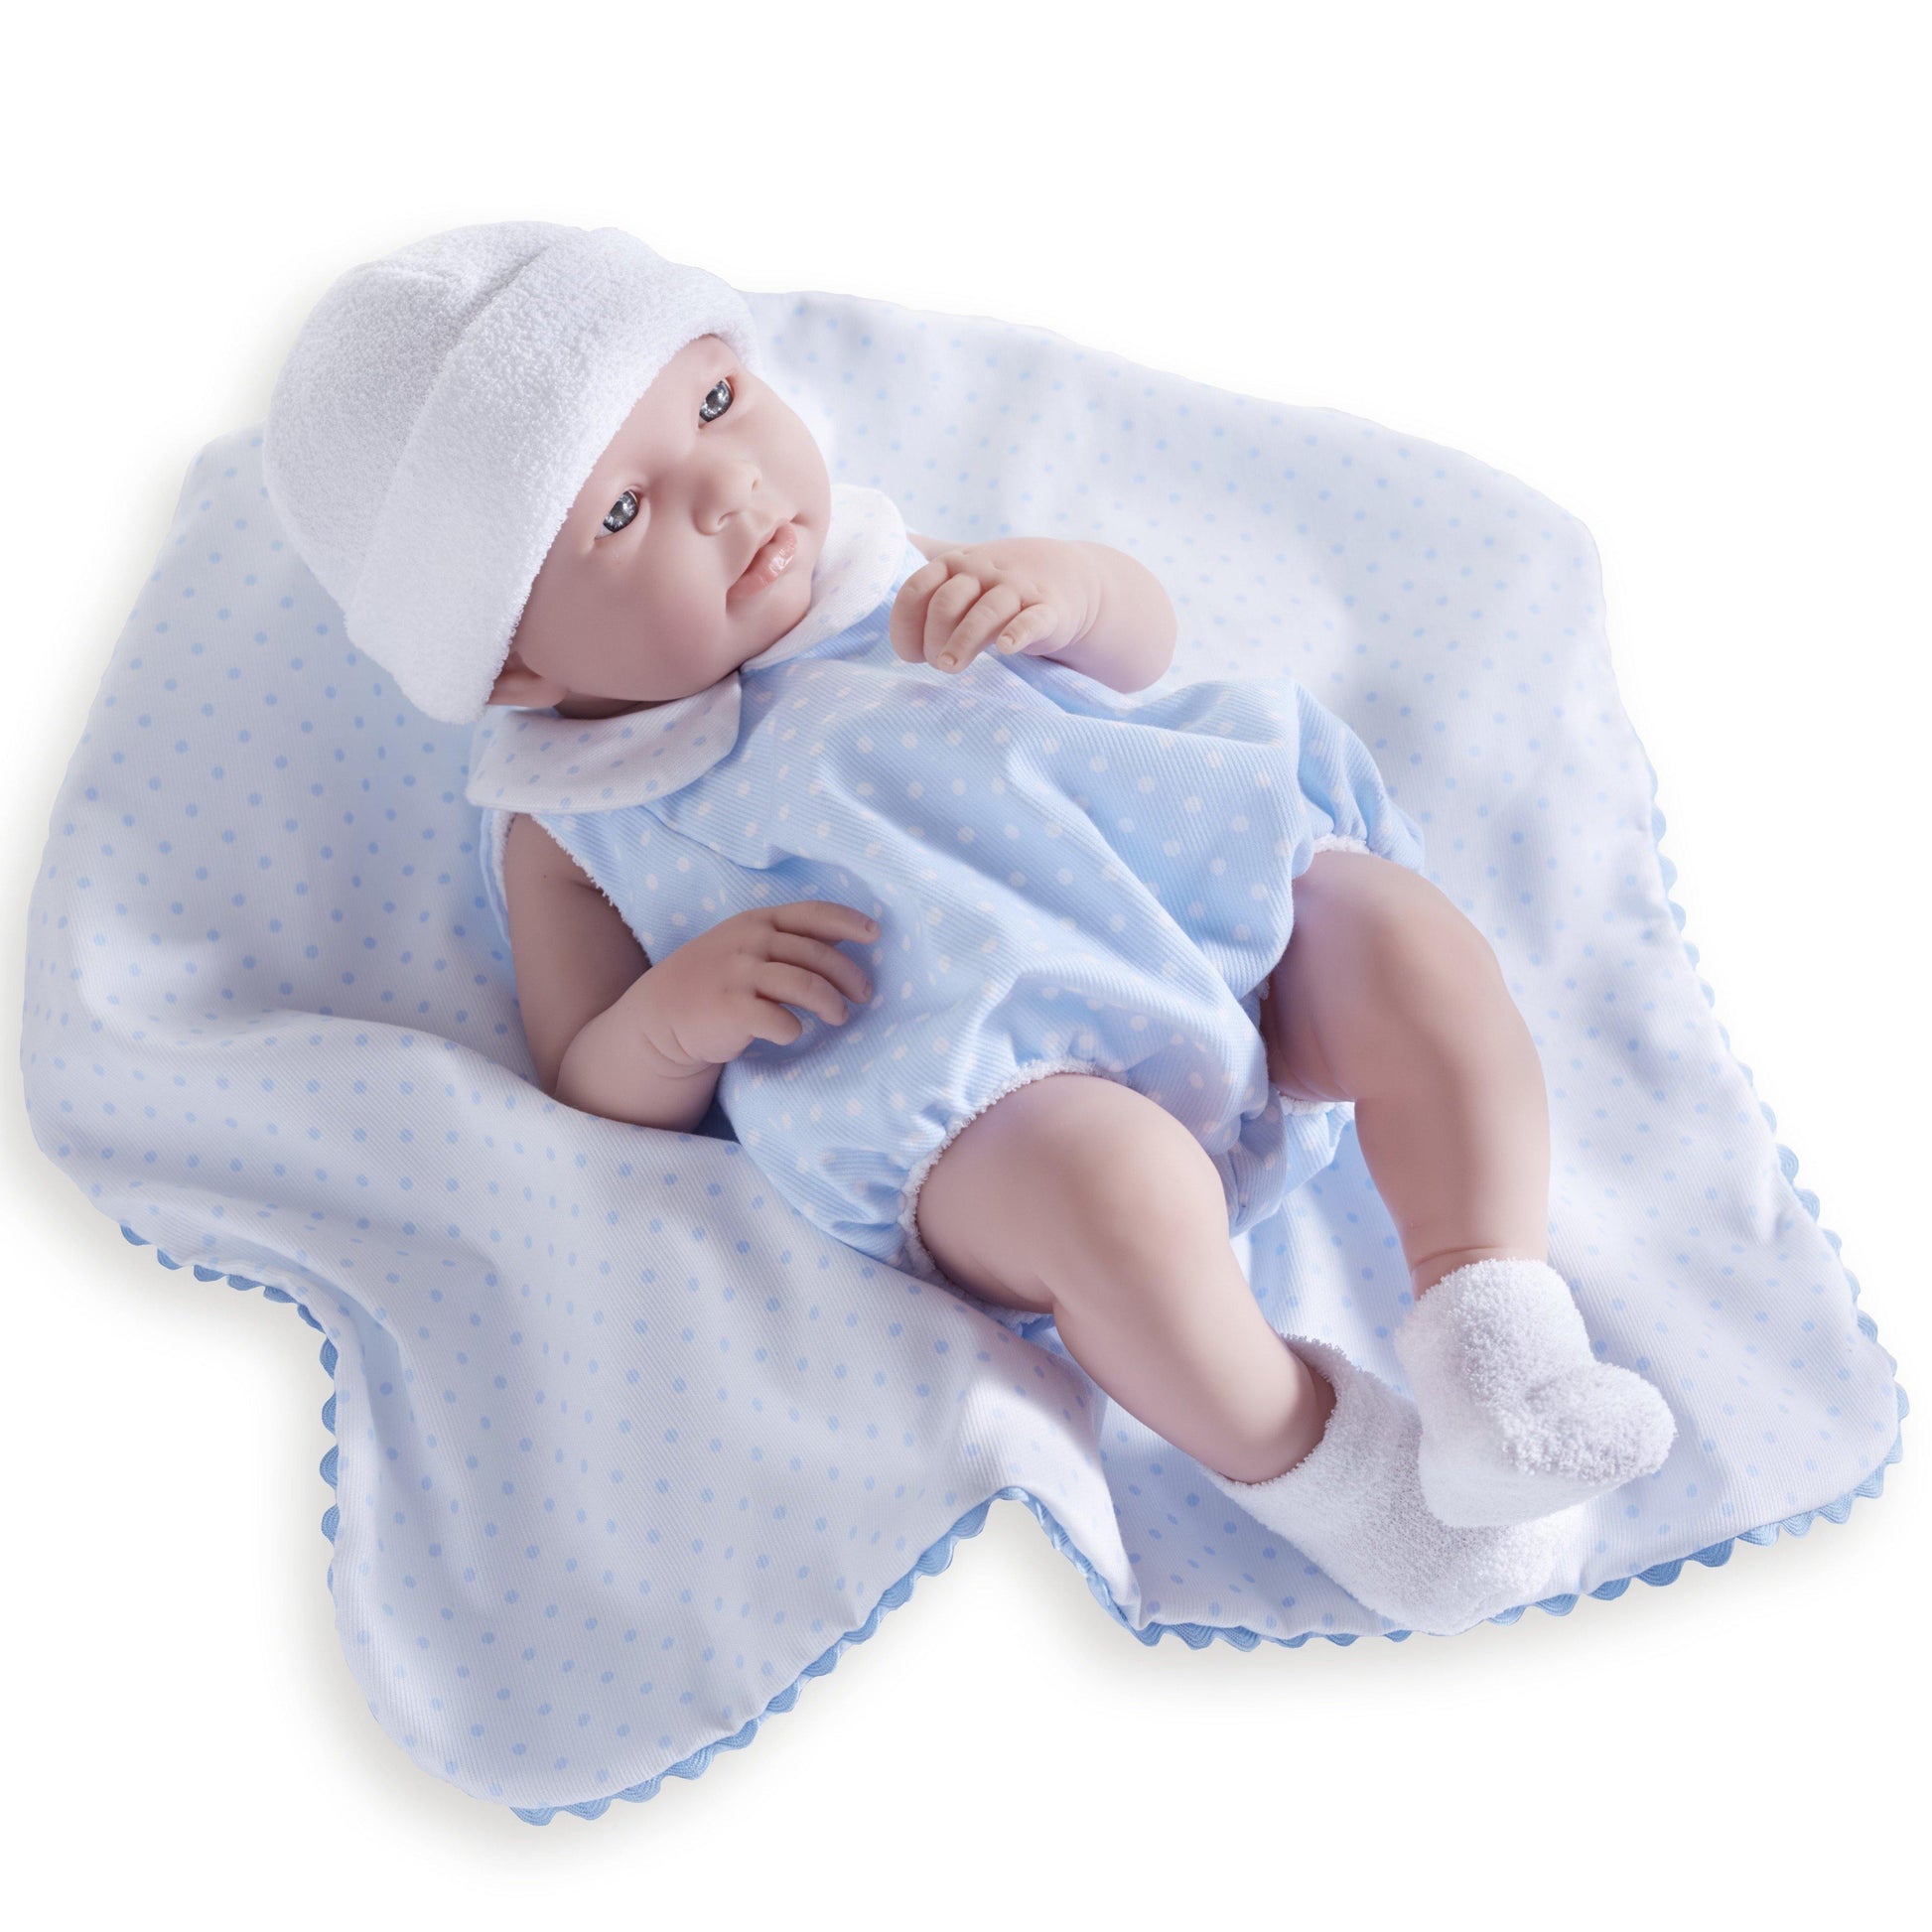 JC Toys, La Newborn All-Vinyl 17in Real Boy Baby Doll-Blue Bubble Suit & Blanket - JC Toys Group Inc.